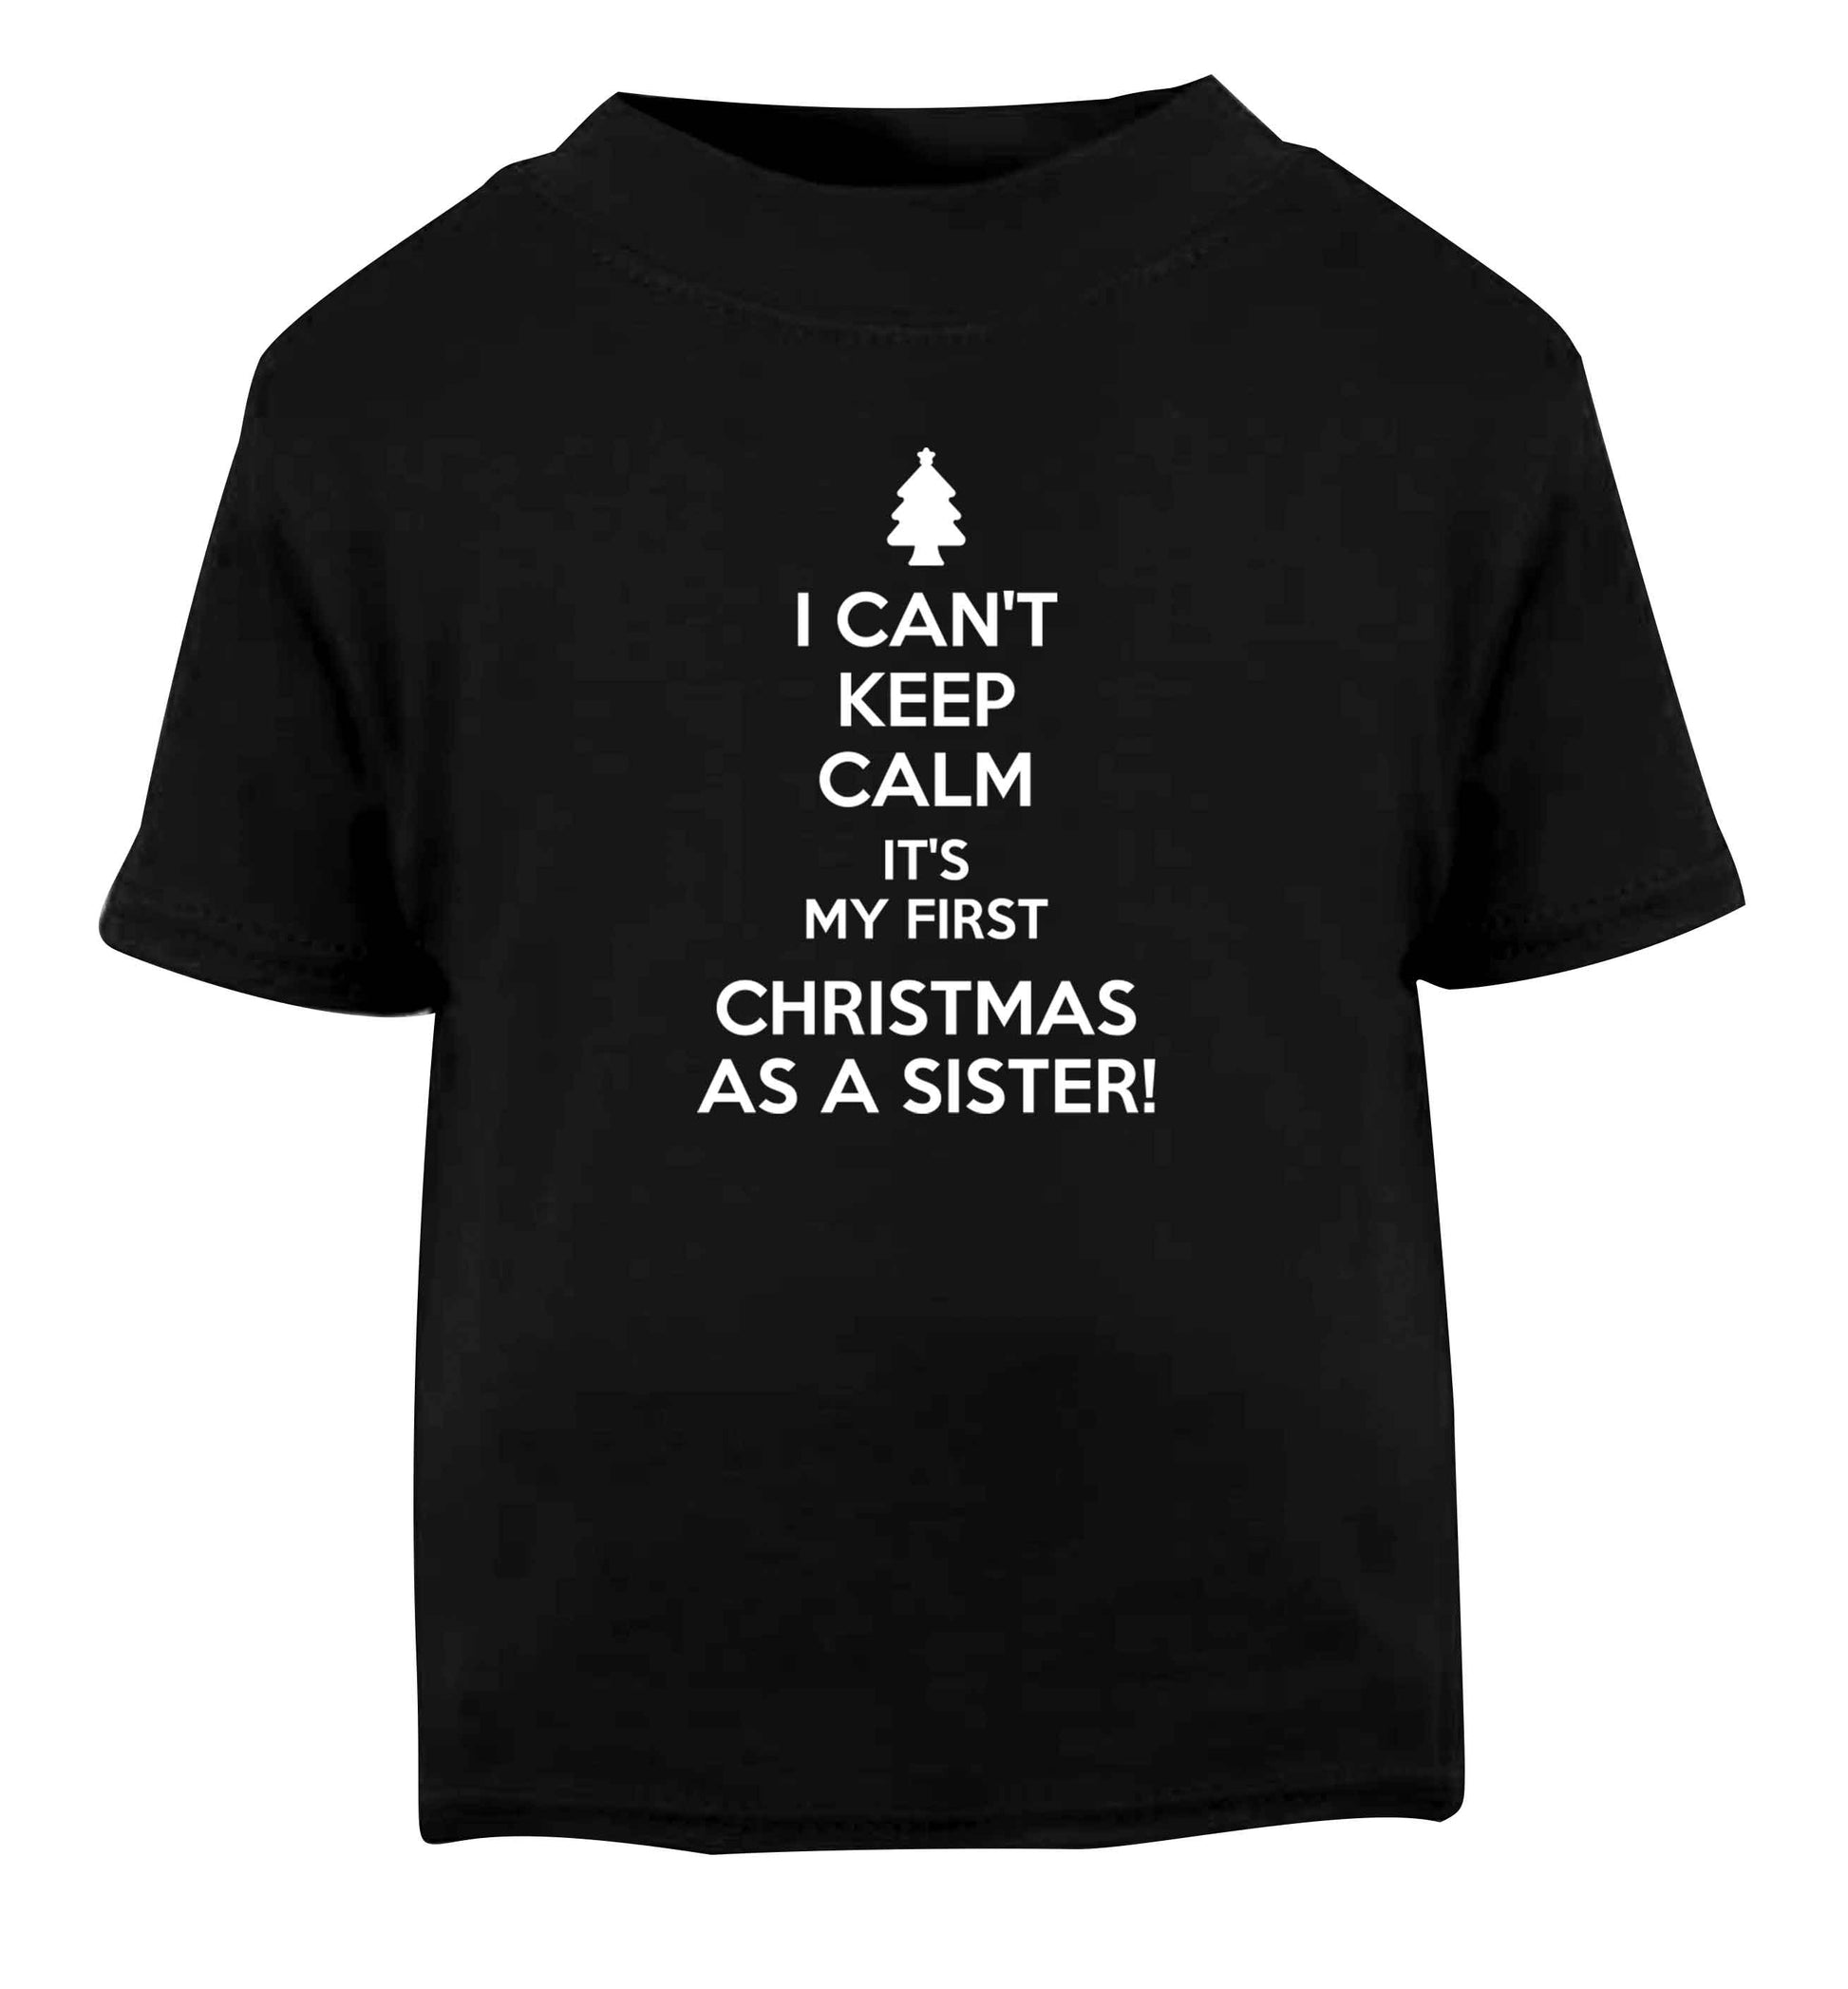 I can't keep calm it's my first Christmas as a sister! Black Baby Toddler Tshirt 2 years